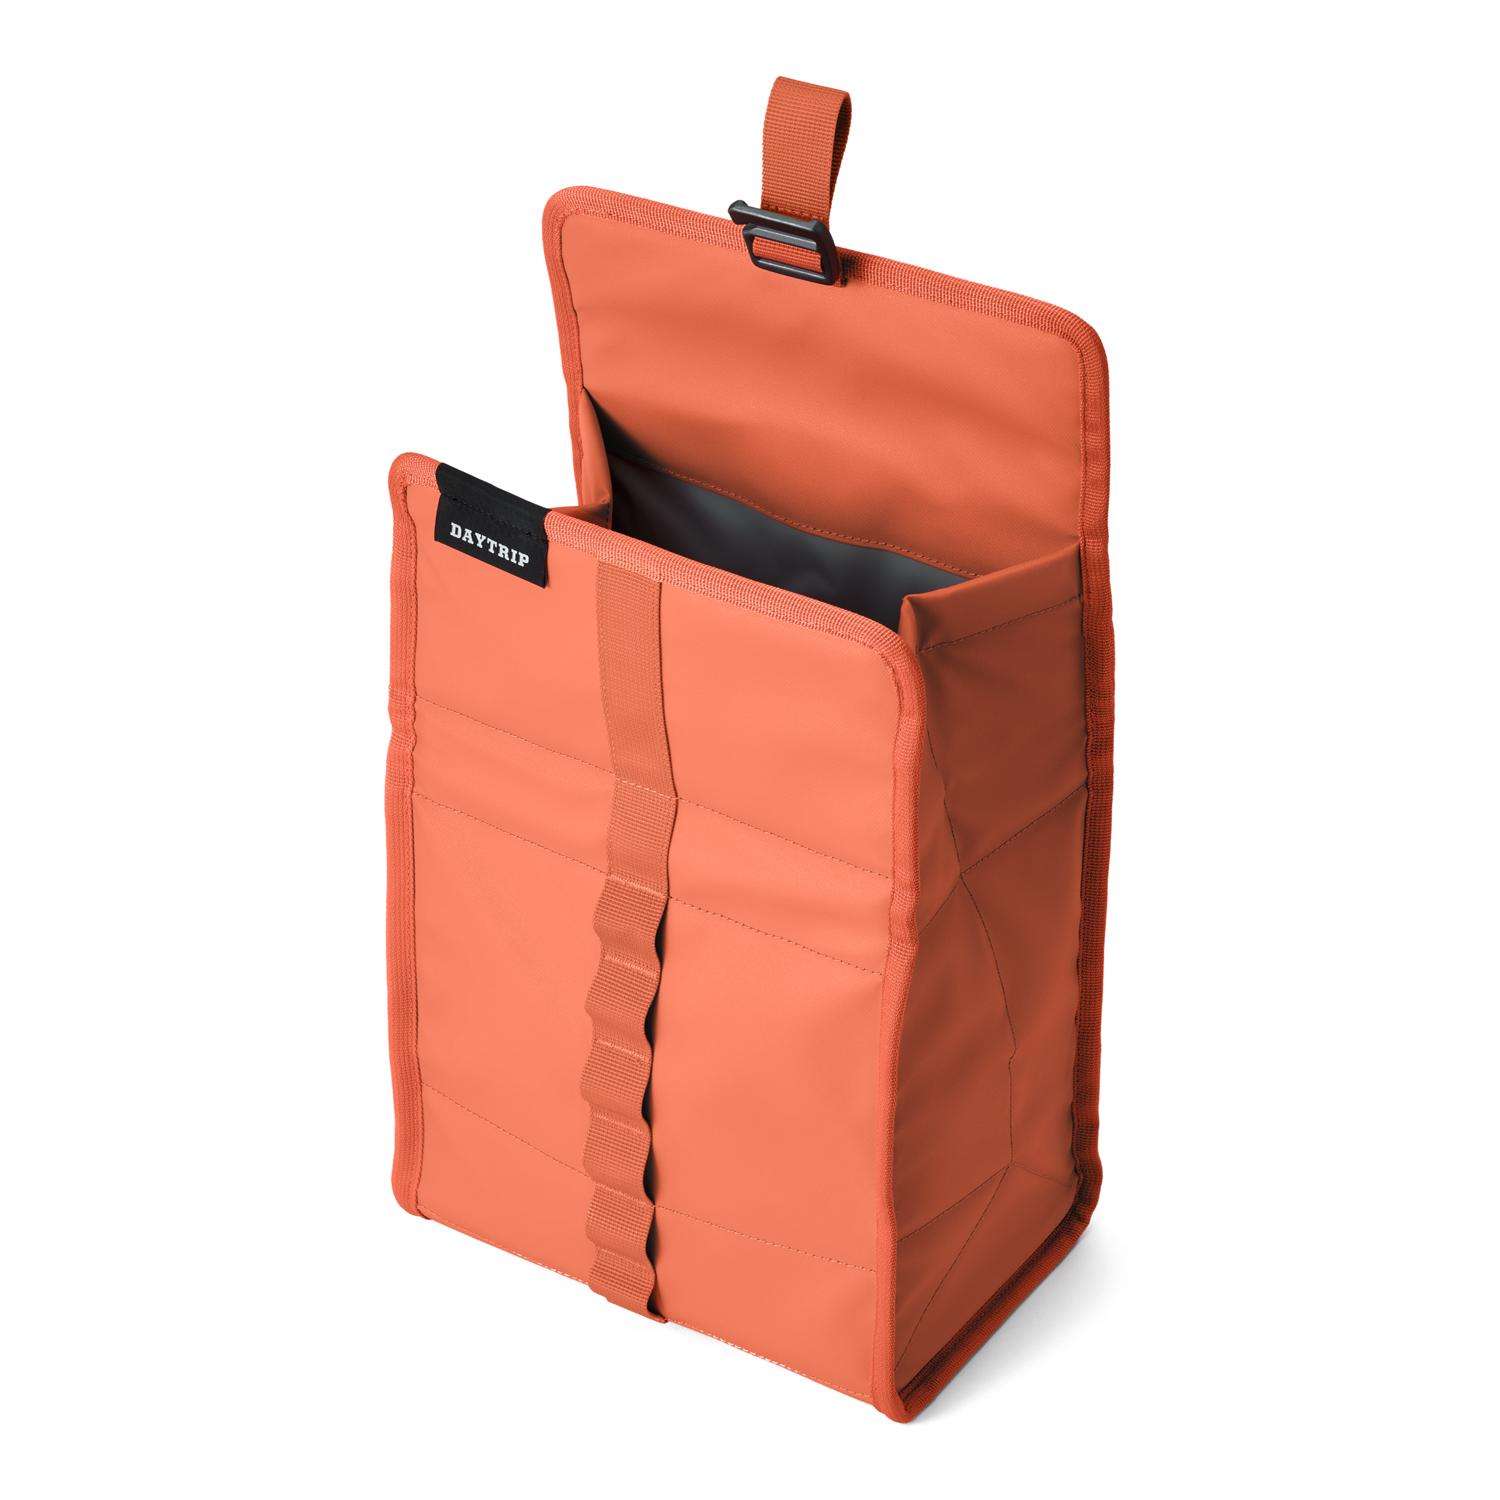 DayTrip Lunch Bag - The Gadget Company